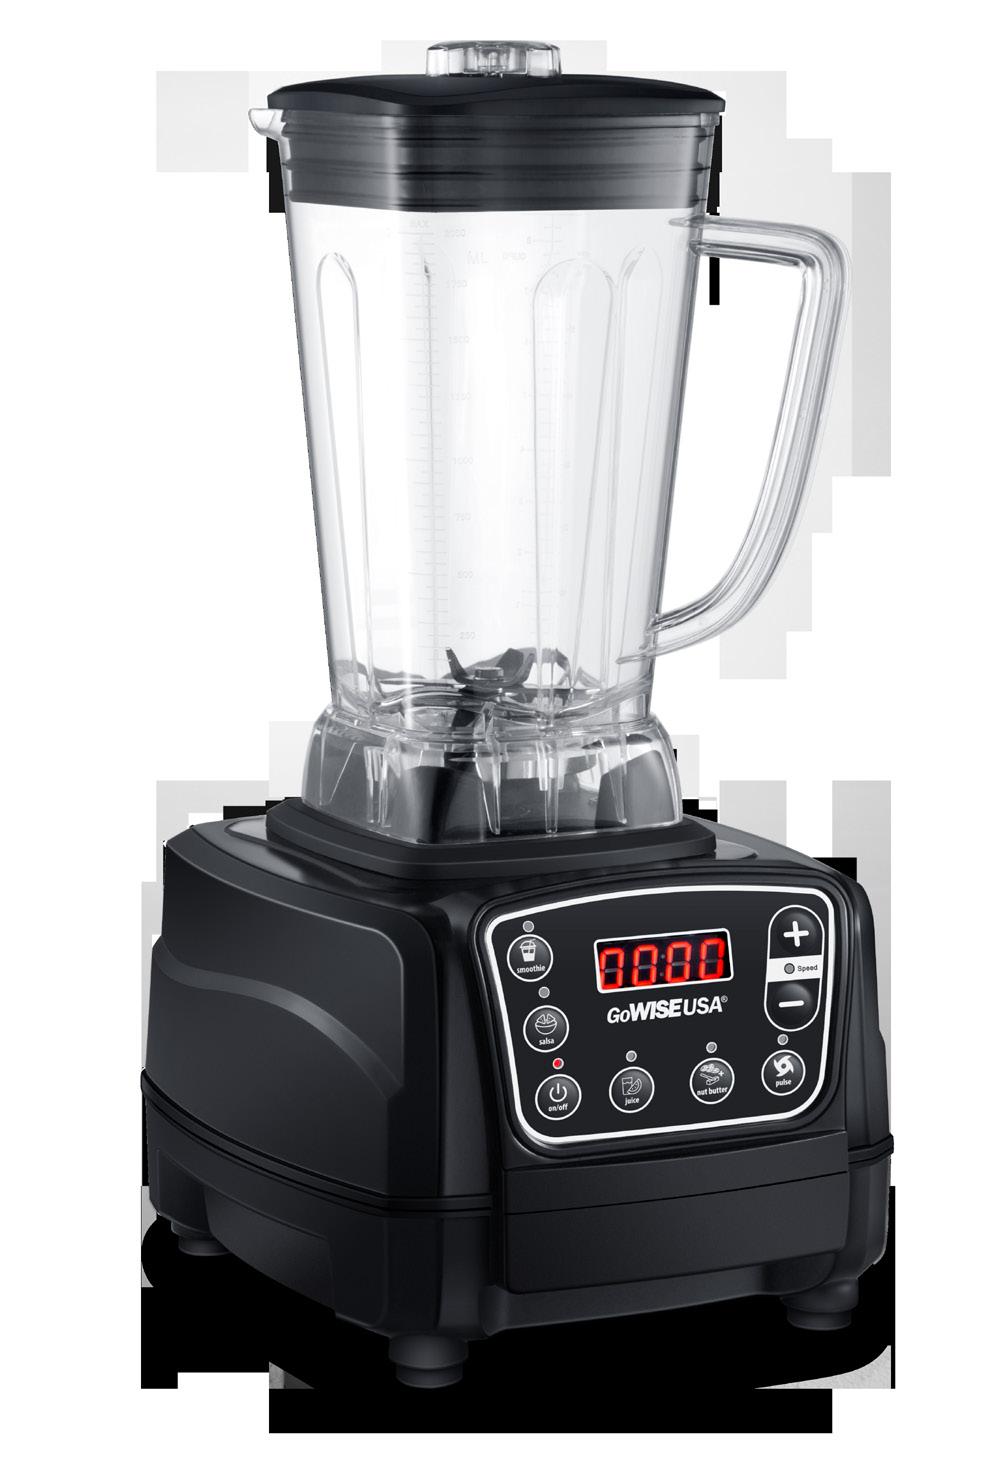 Product Introduction Blend your favorite smoothies, sauce, dips, and more with the GoWISE High-Speed